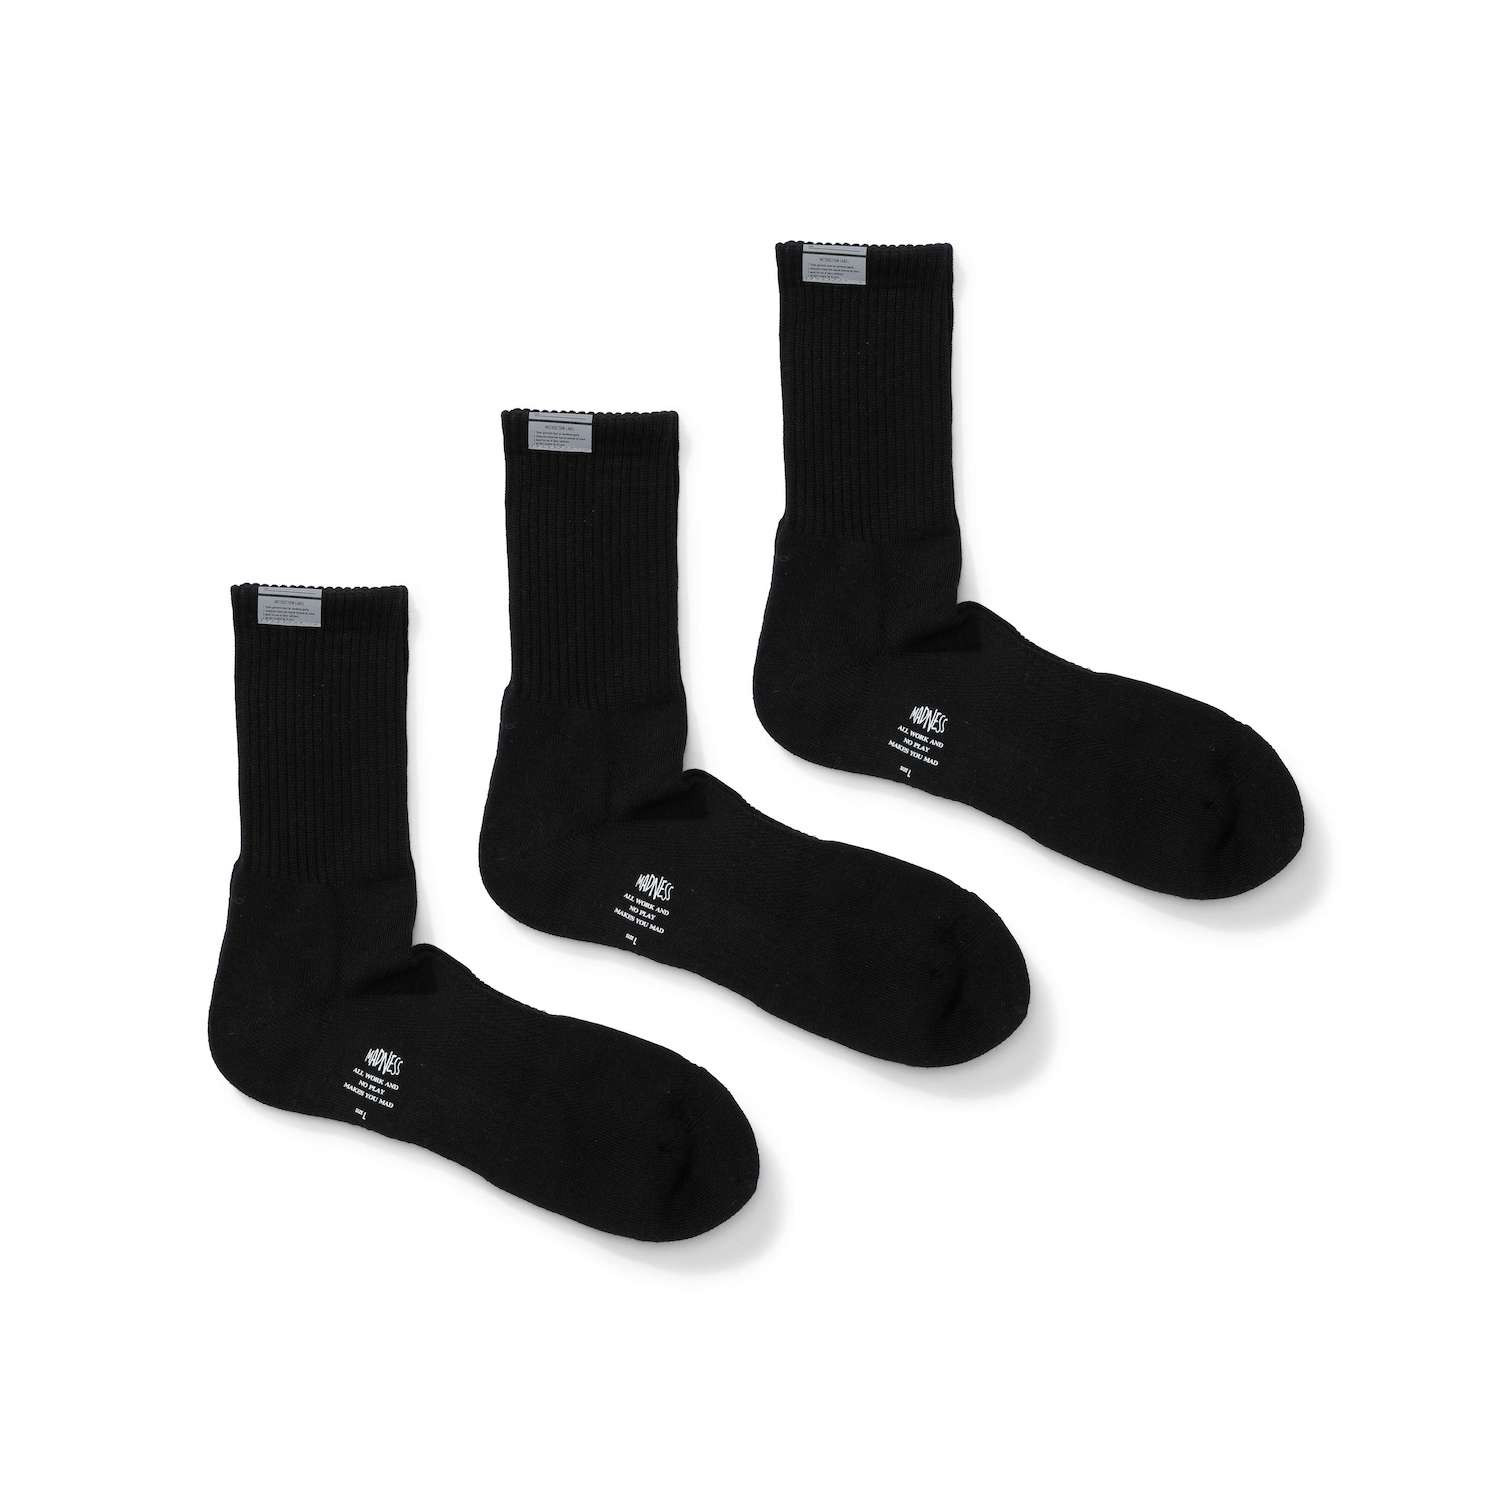 MADNESS 3 IN 1 PACK SOCKS | MADNESS